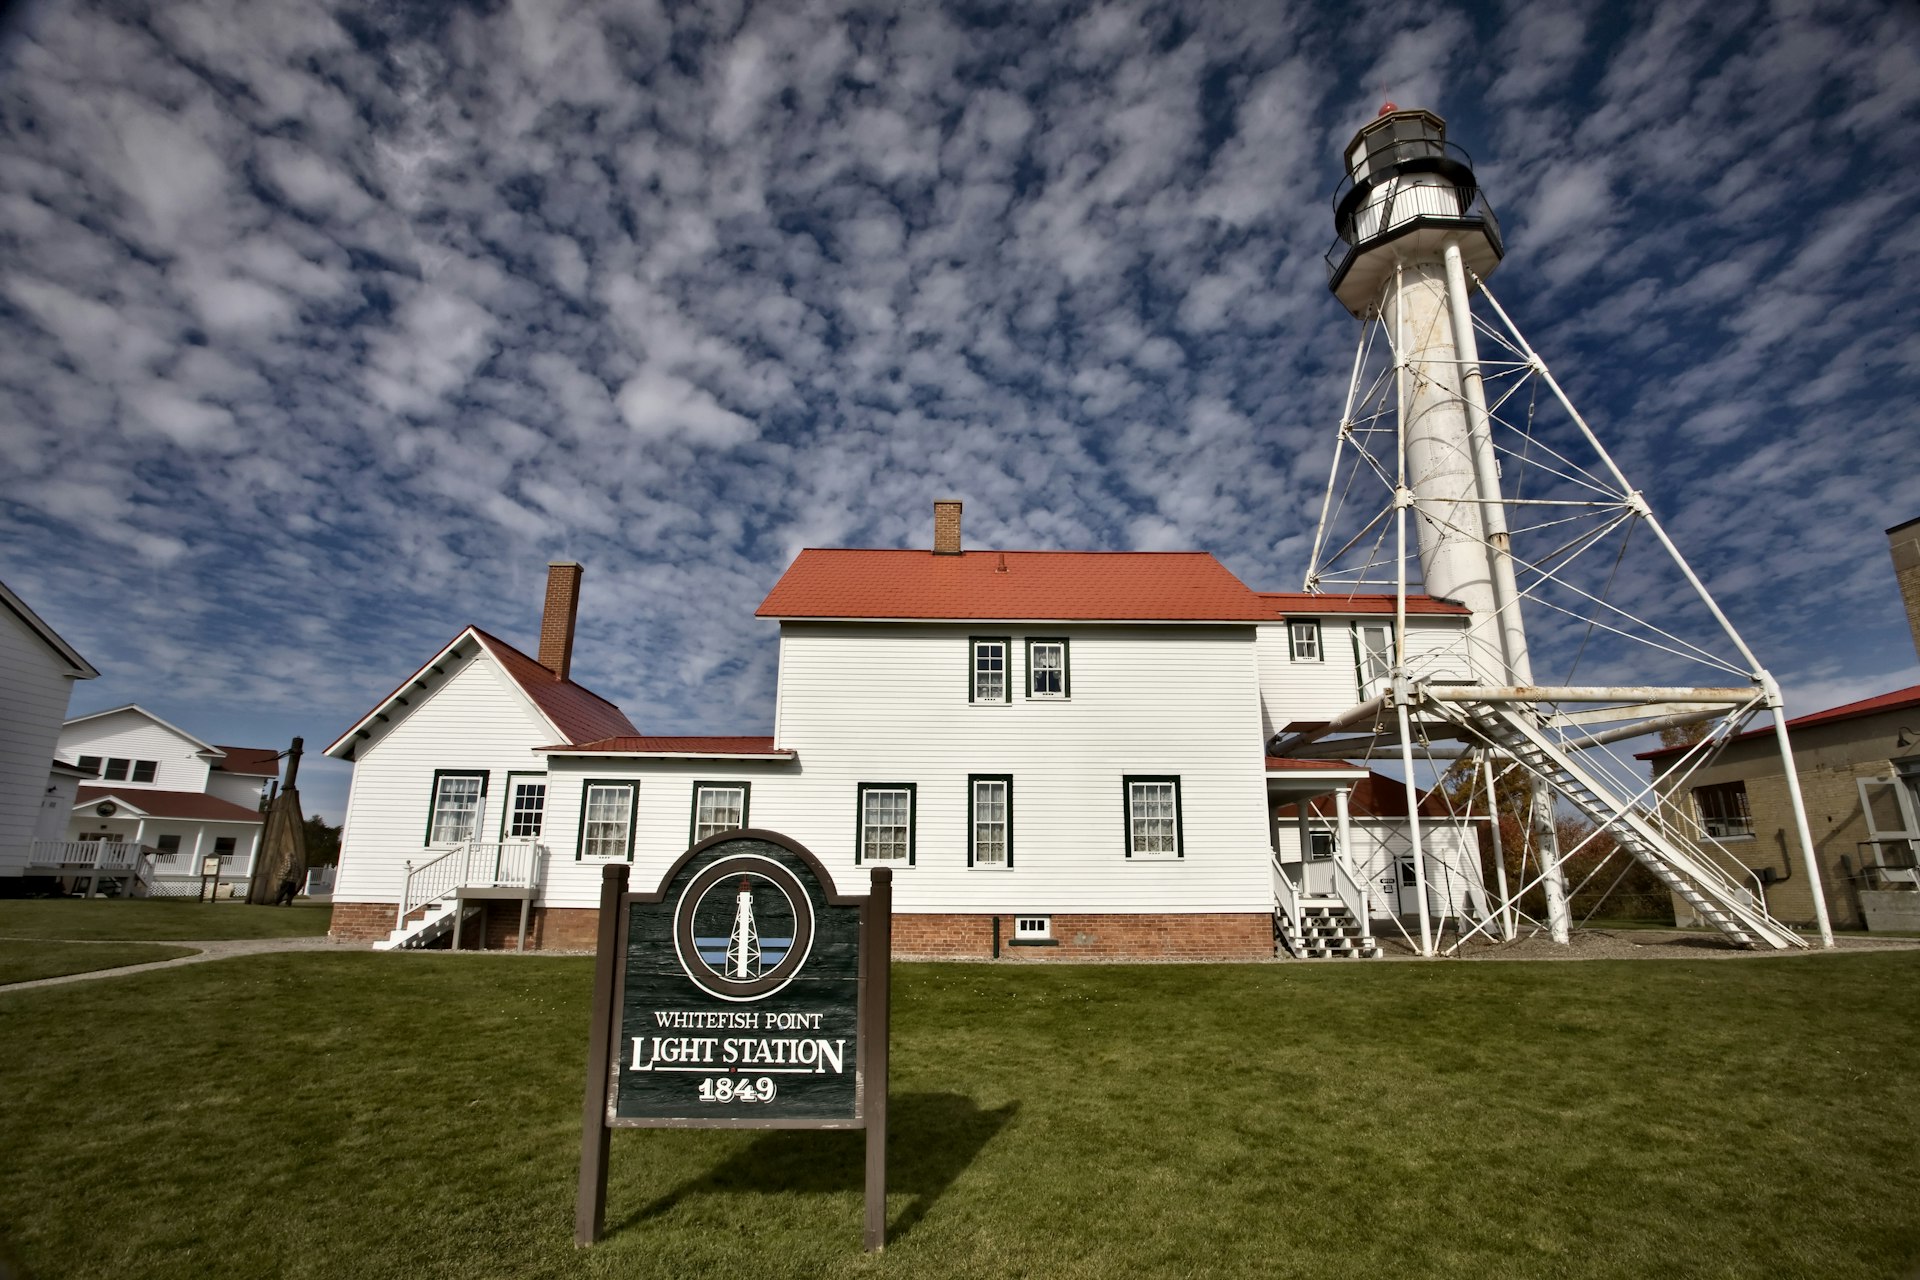 A lighhouse and red-roofed buildings. A sign reads "Whitefish Point Light Station 1849"